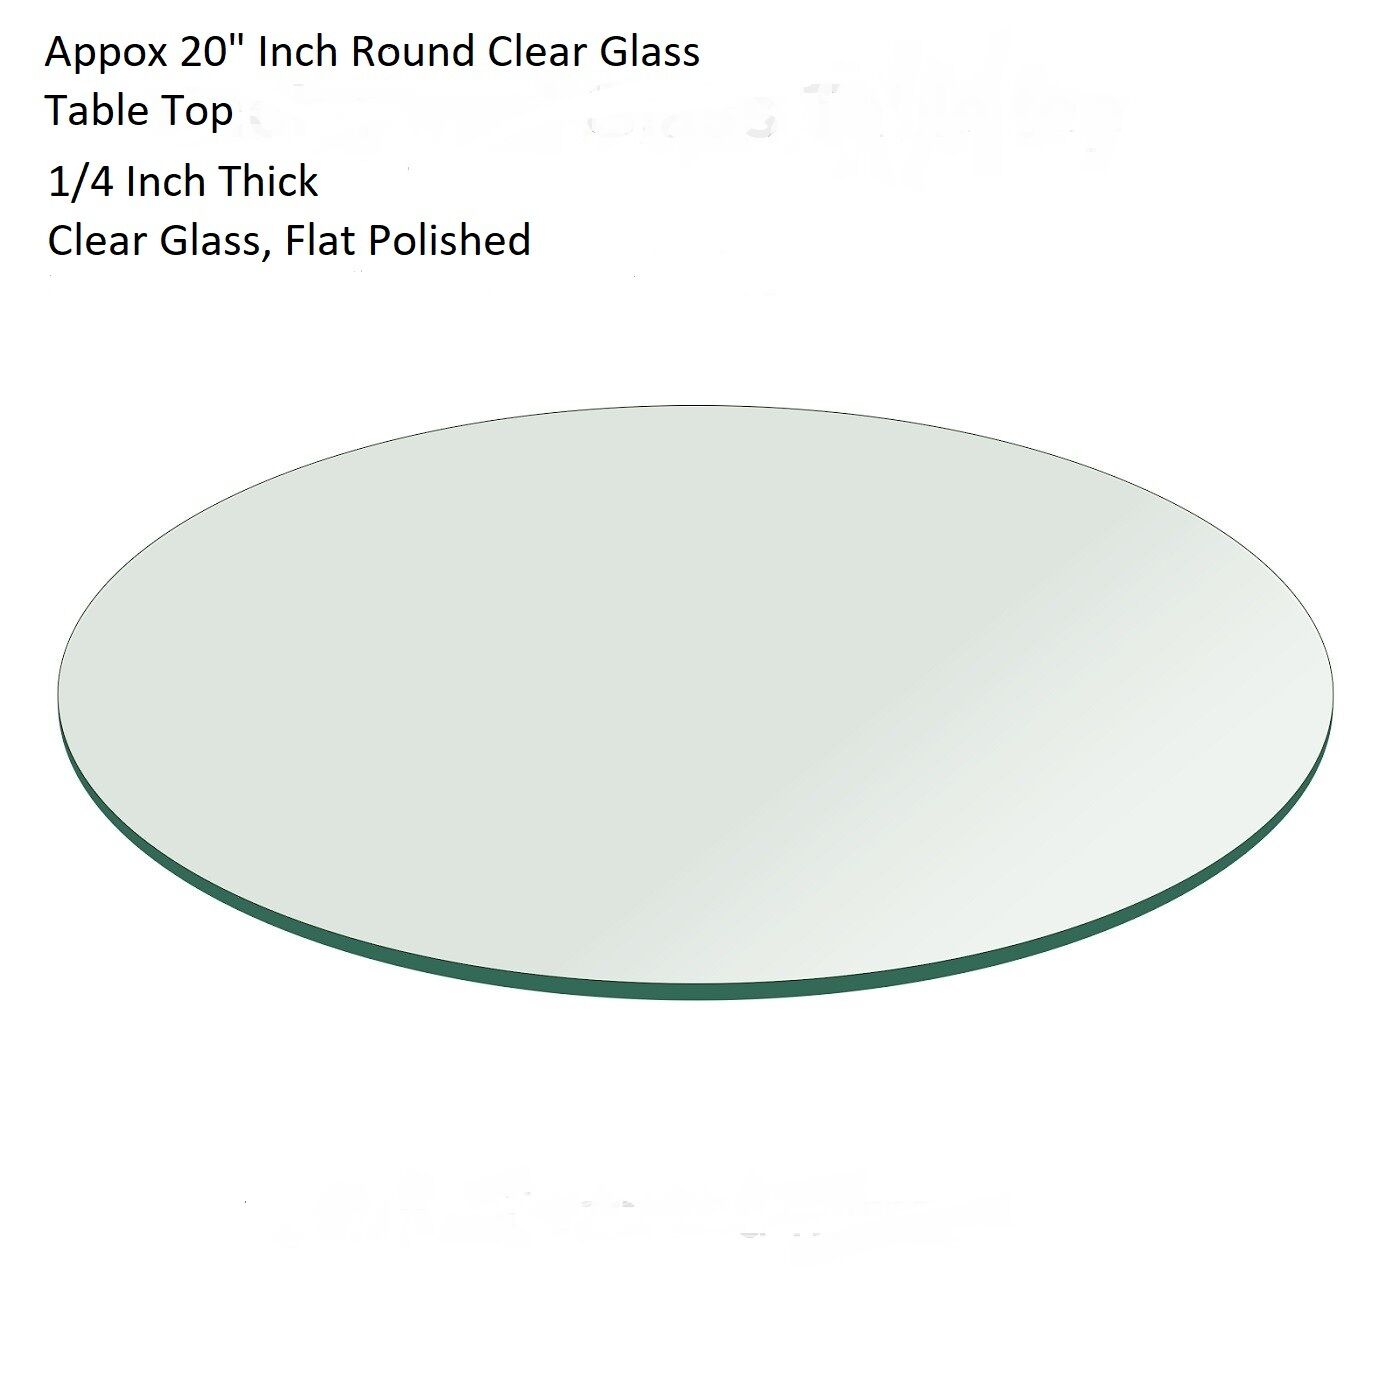 20" Approx. Round Flat Polished Edge Textured Glass Table Top 1/4" Thick